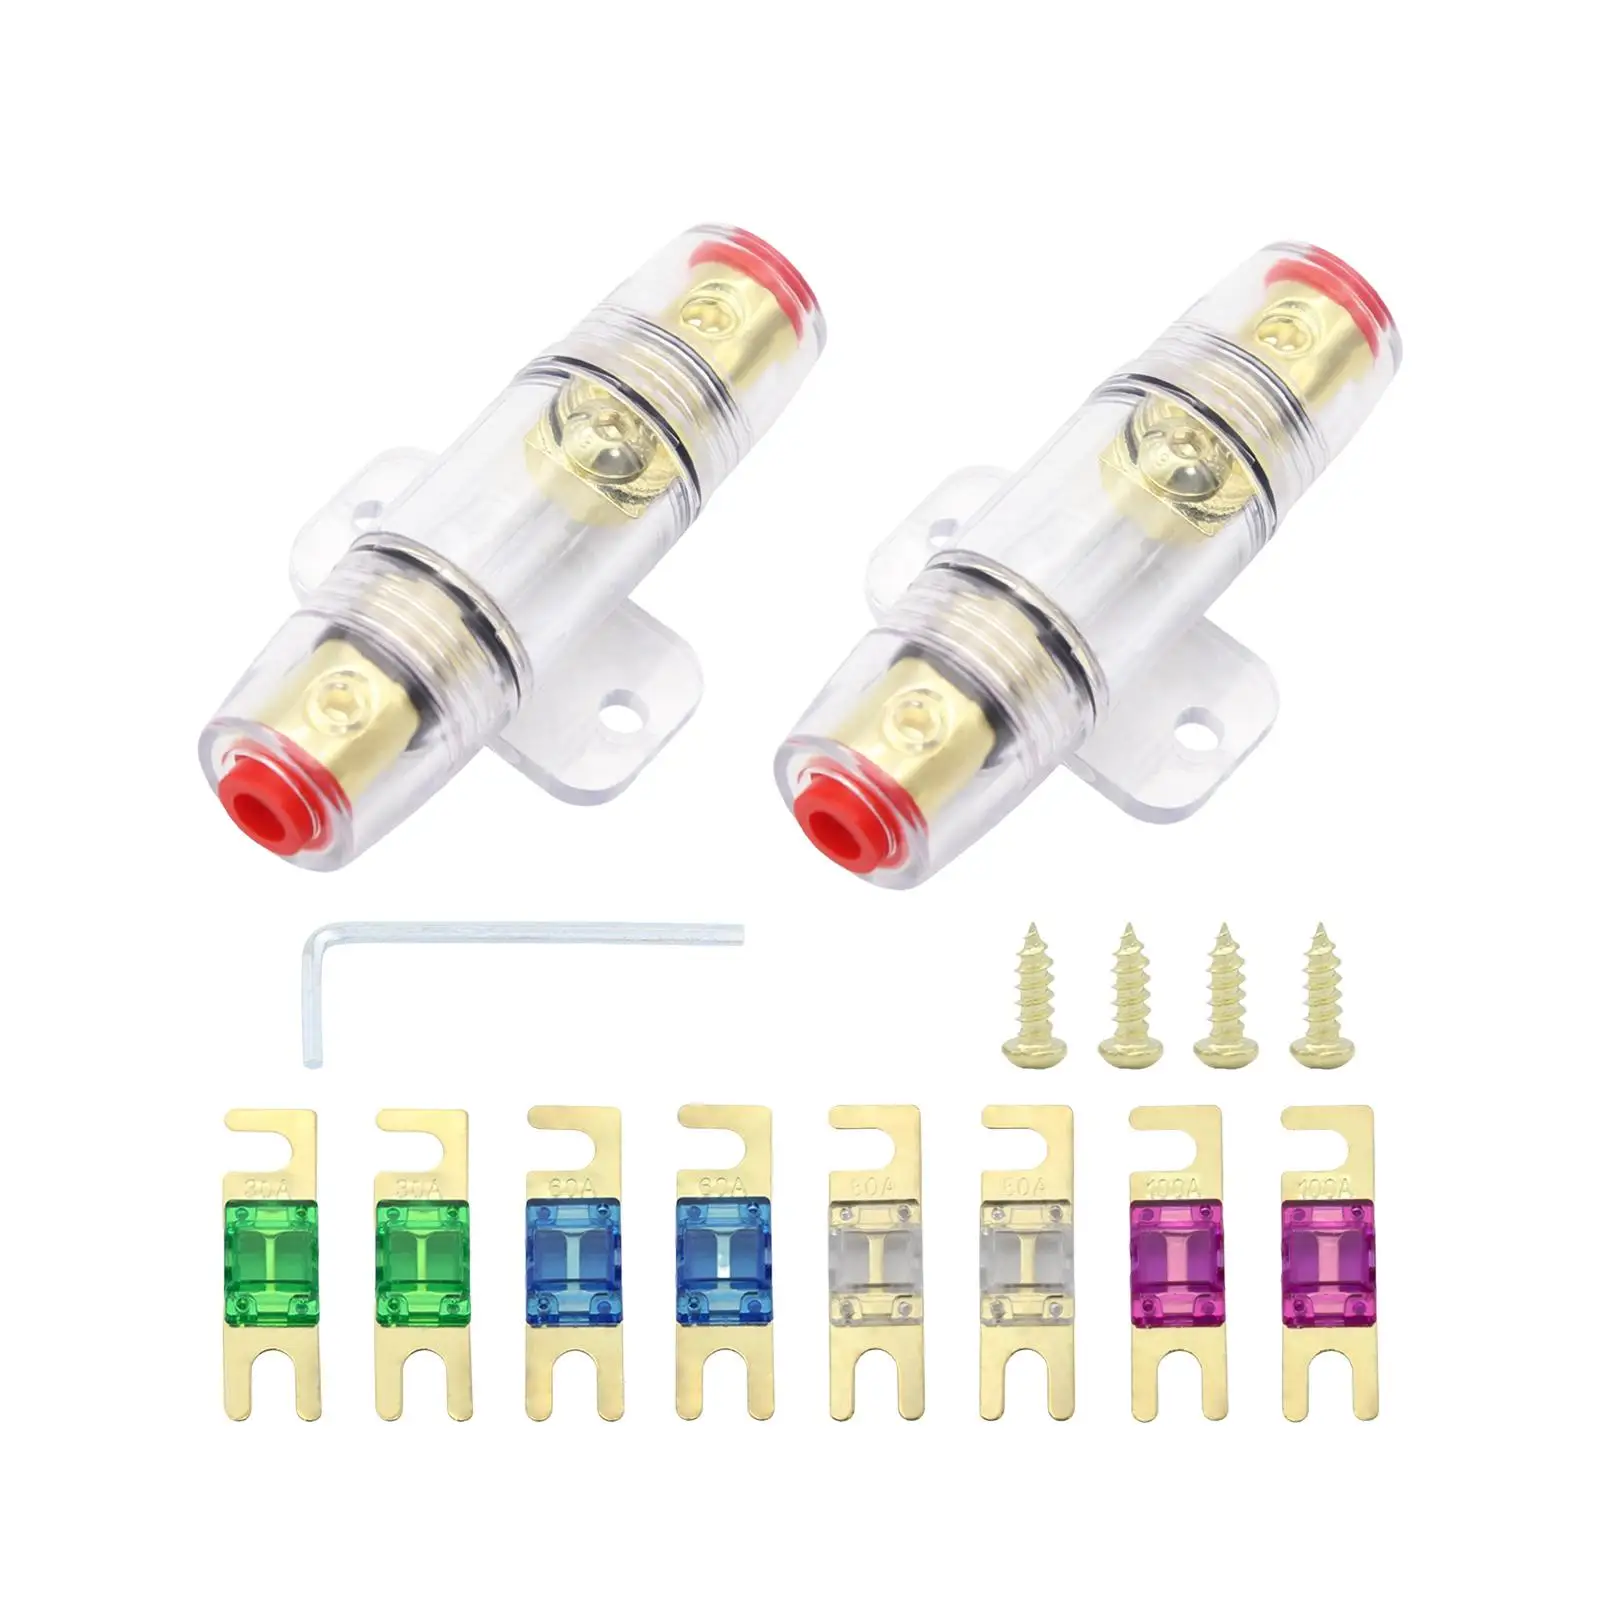 2 Pieces Mini Anl Fuse Holder Set Clear Cover with 30A 60A 80A 100A Fuses